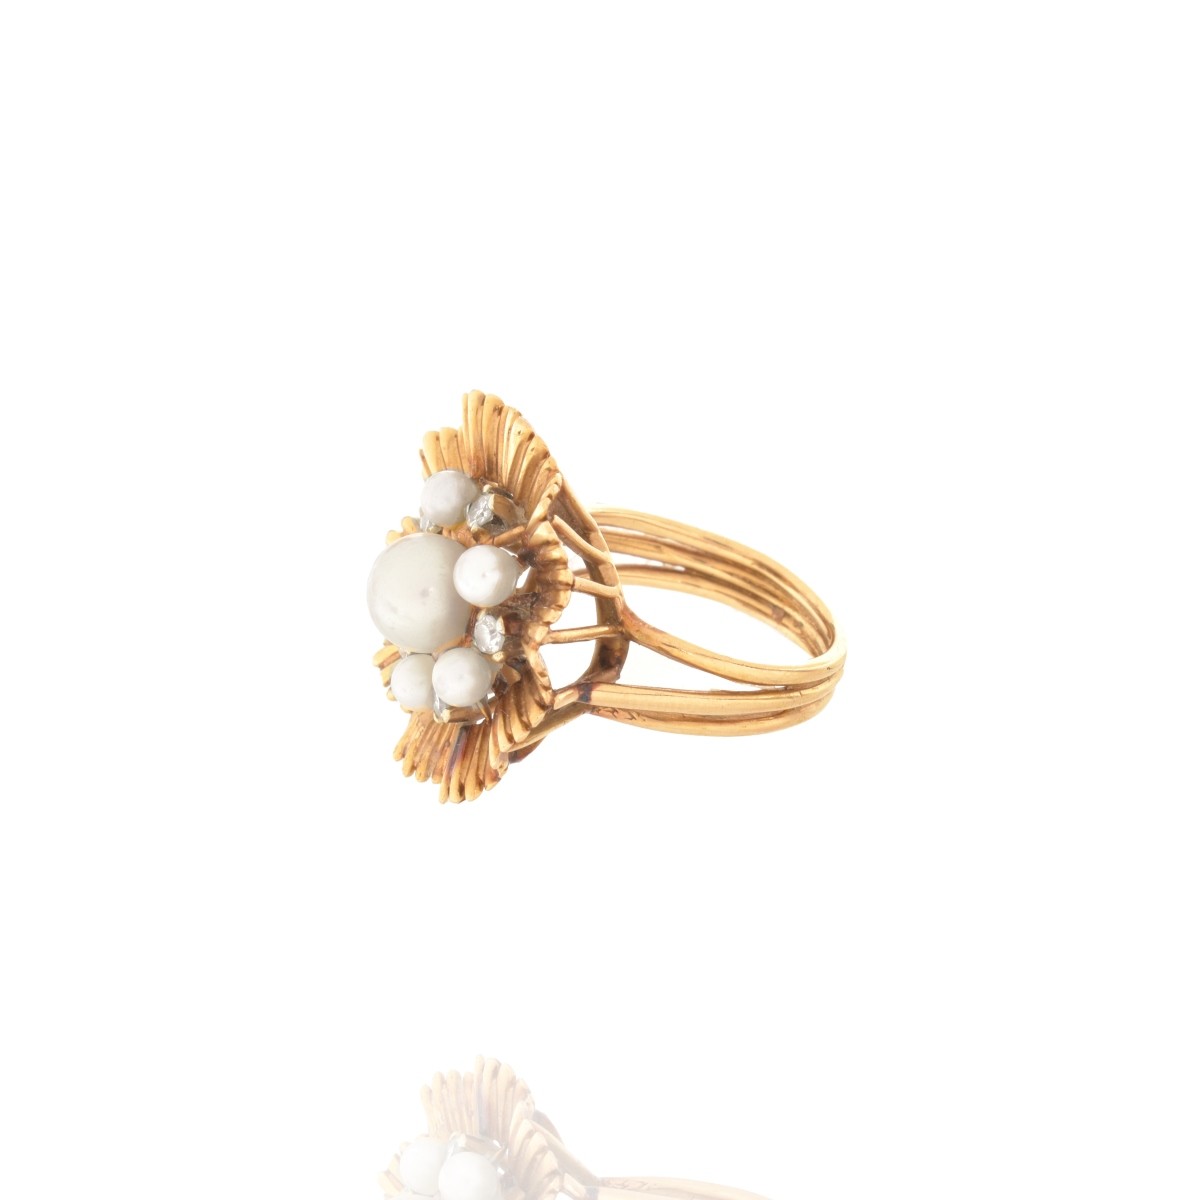 Diamond, Pearl and 14K Ring